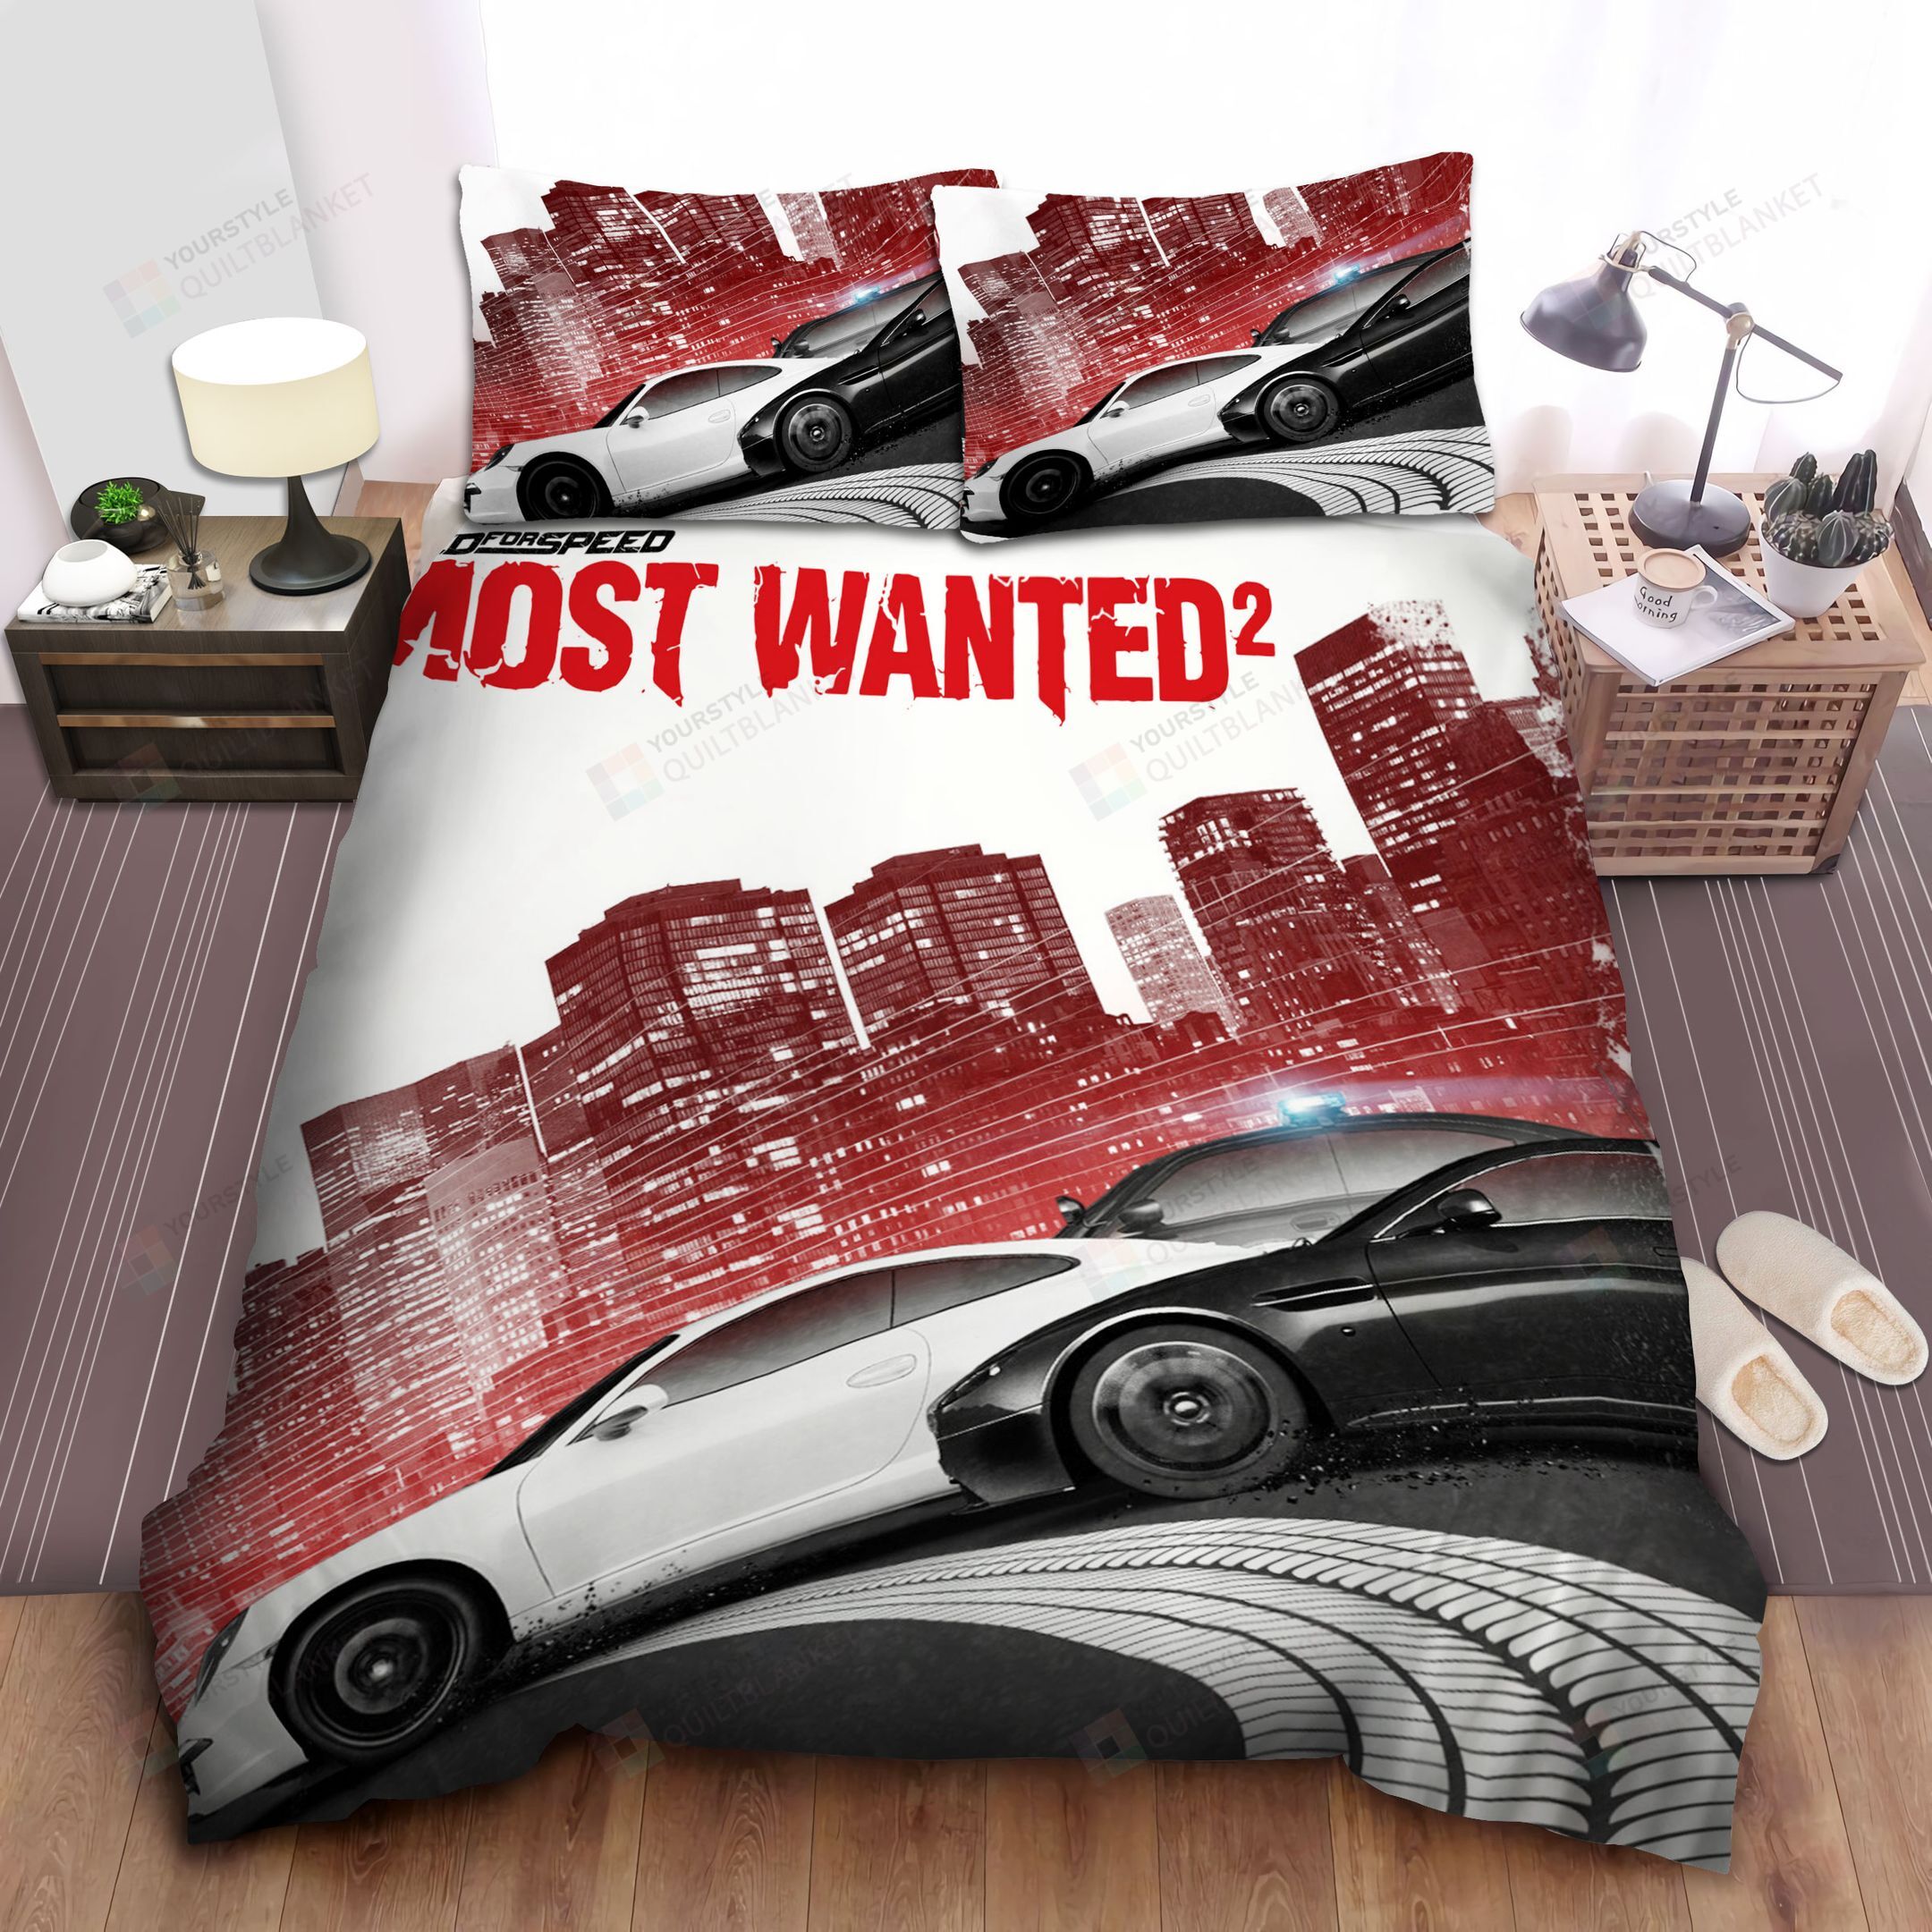 Need For Speed Most Wanted Bed Sheets Spread Comforter Duvet Cover Bedding Sets